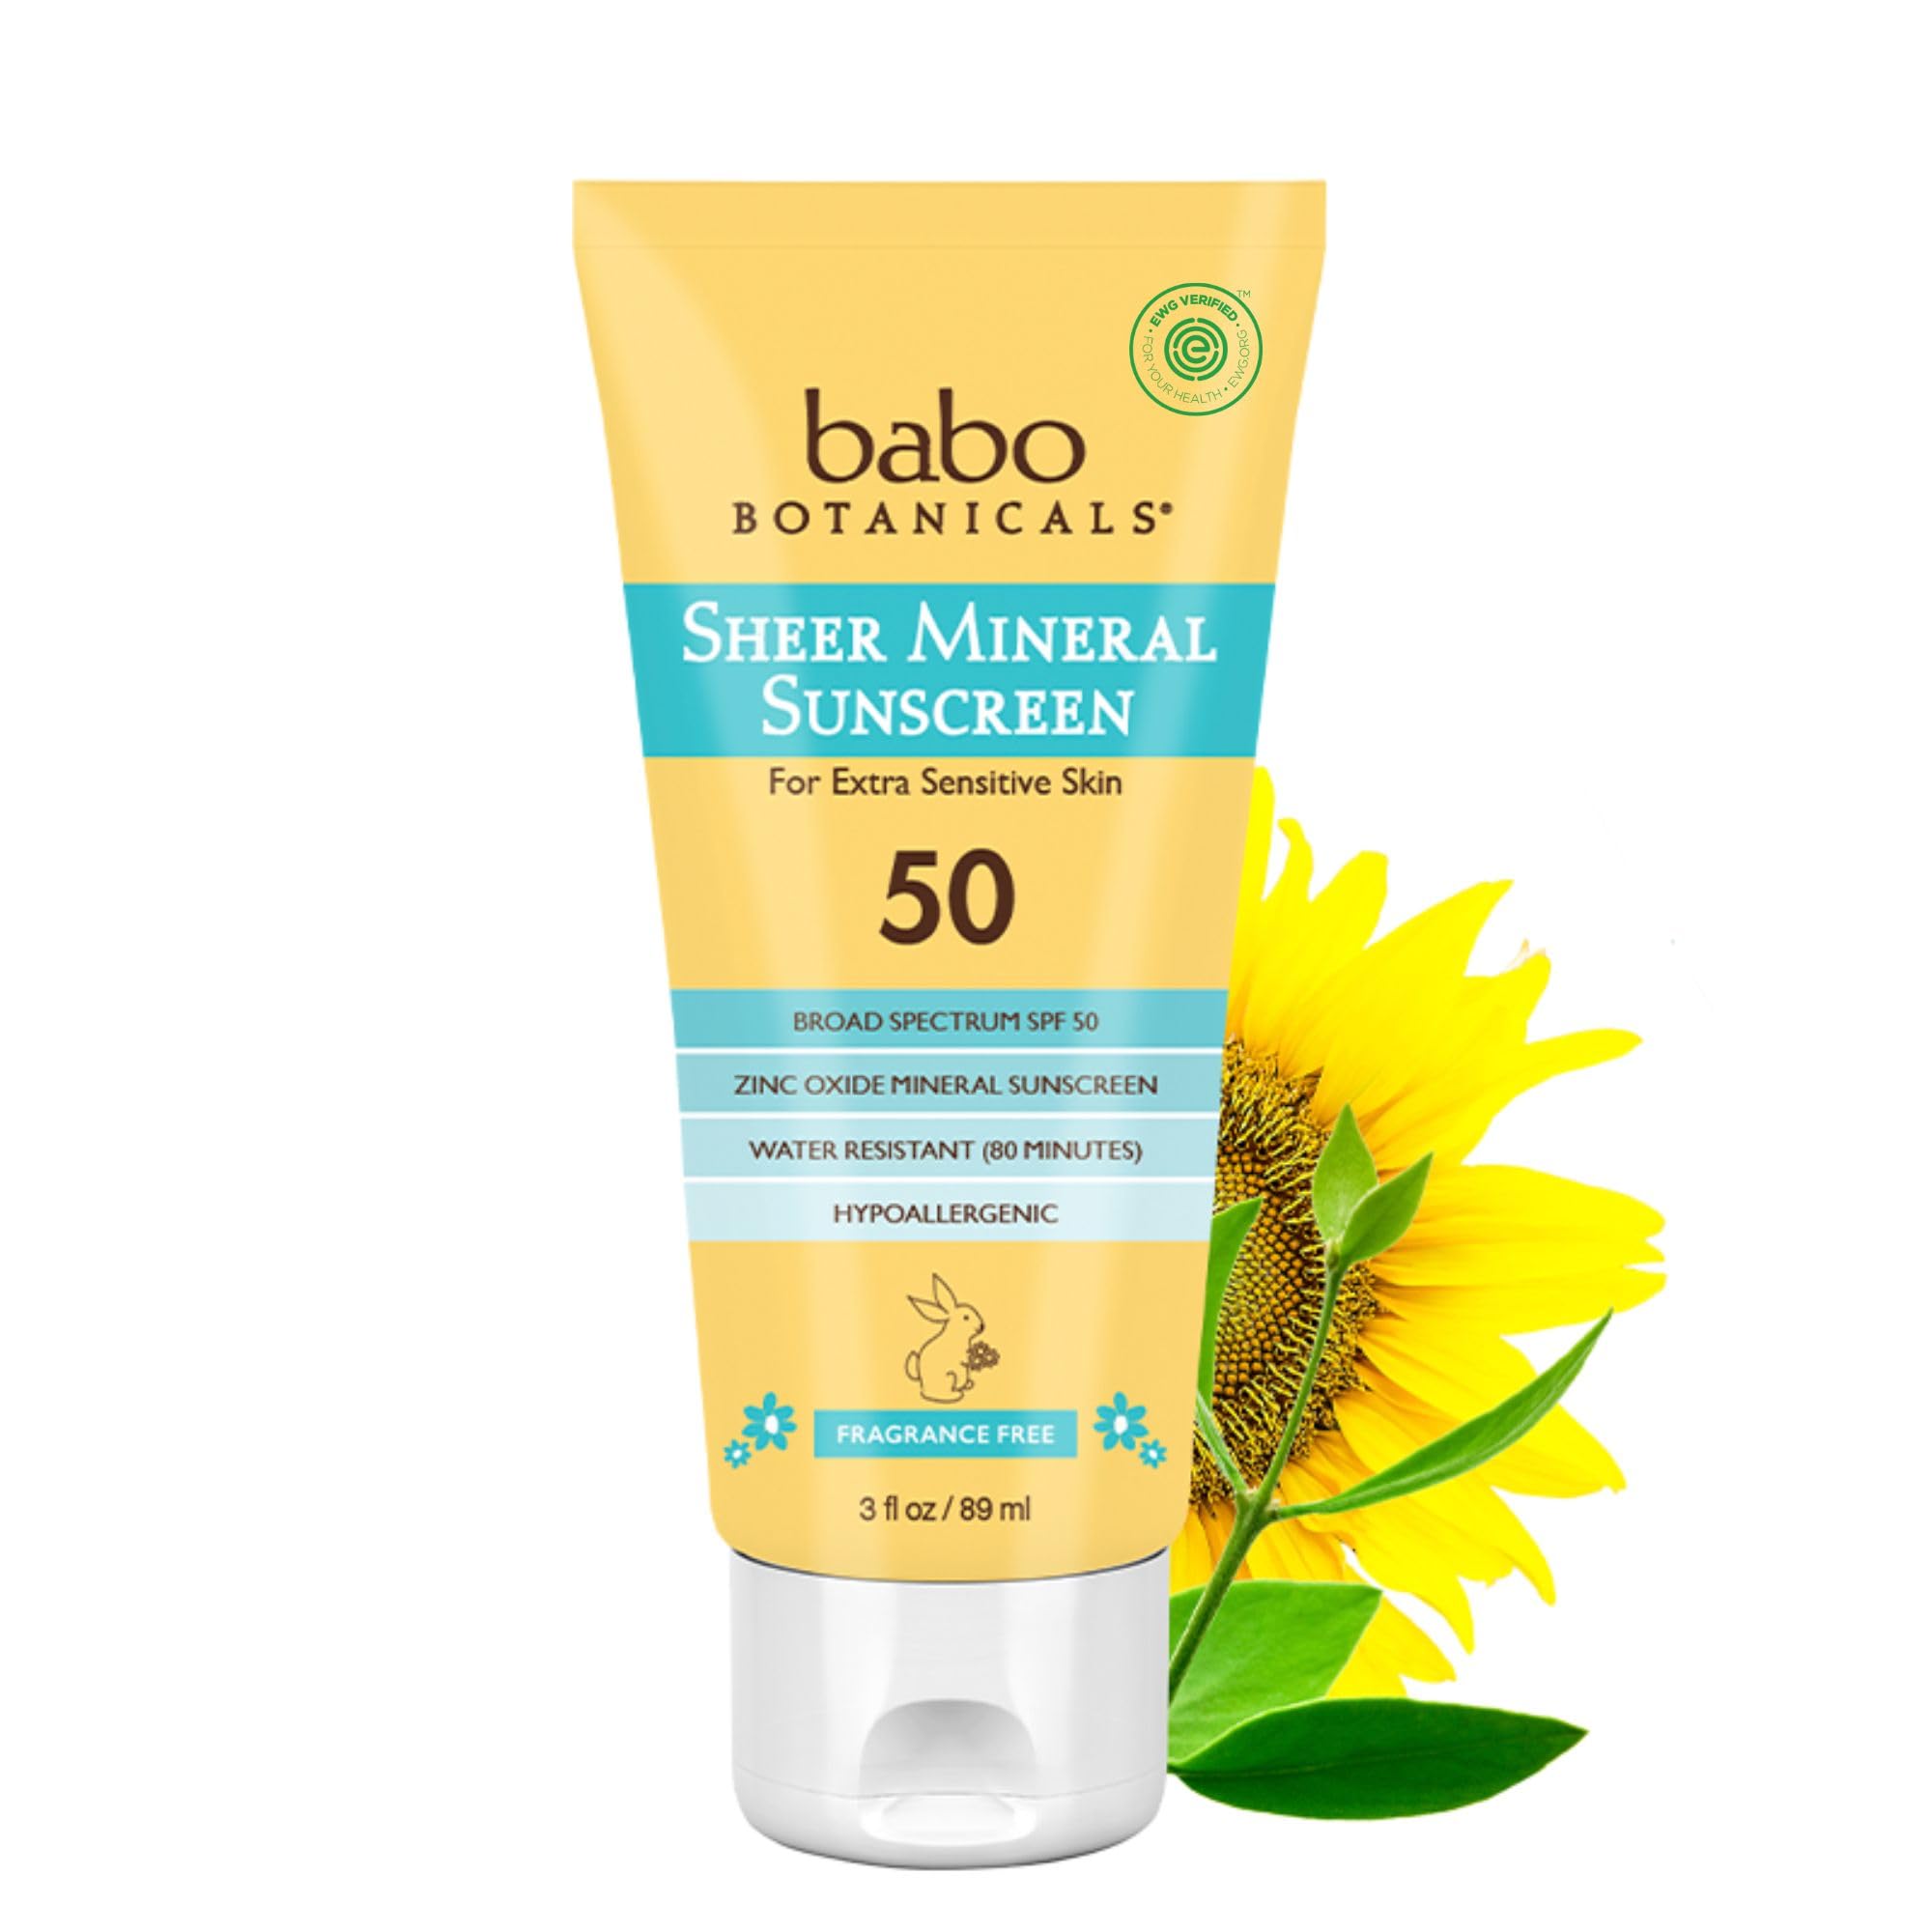 Babo Botanicals Sheer Mineral Sunscreen Lotion SPF 50 with 100% Mineral Active Ingredients - for Babies, Kids or Extra Sensitive Skin - Lightweight, Water Resistant & Fragrance Free - 3 fl. oz.